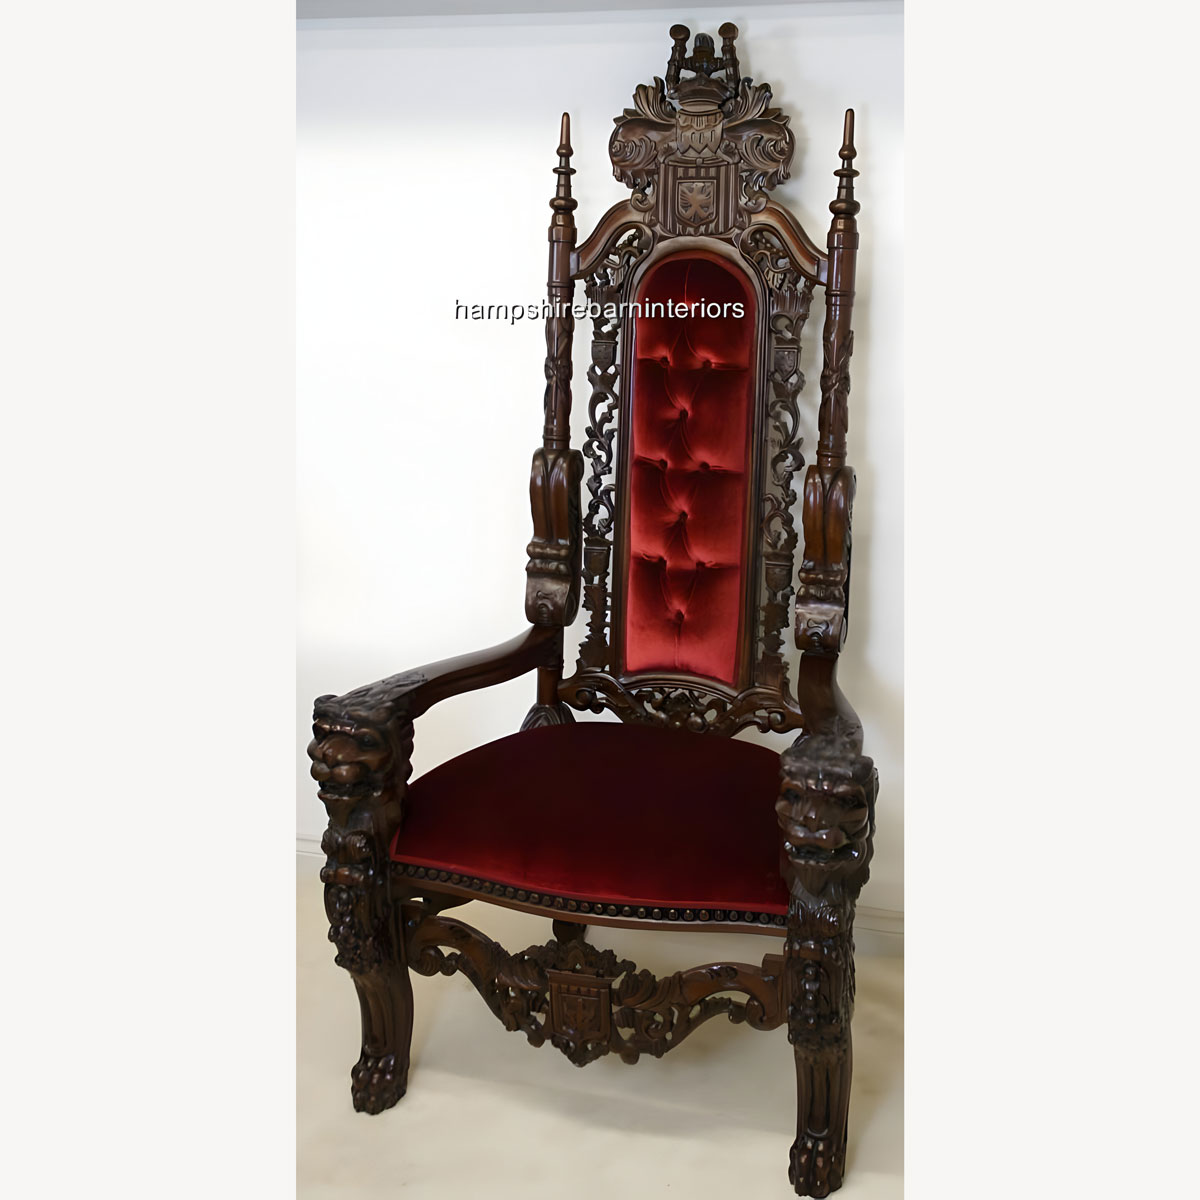 A Gothic Lion King Throne Chair In Mahogany And Red Velvet 4 - Hampshire Barn Interiors - A Gothic Lion King Throne Chair In Mahogany And Red Velvet -